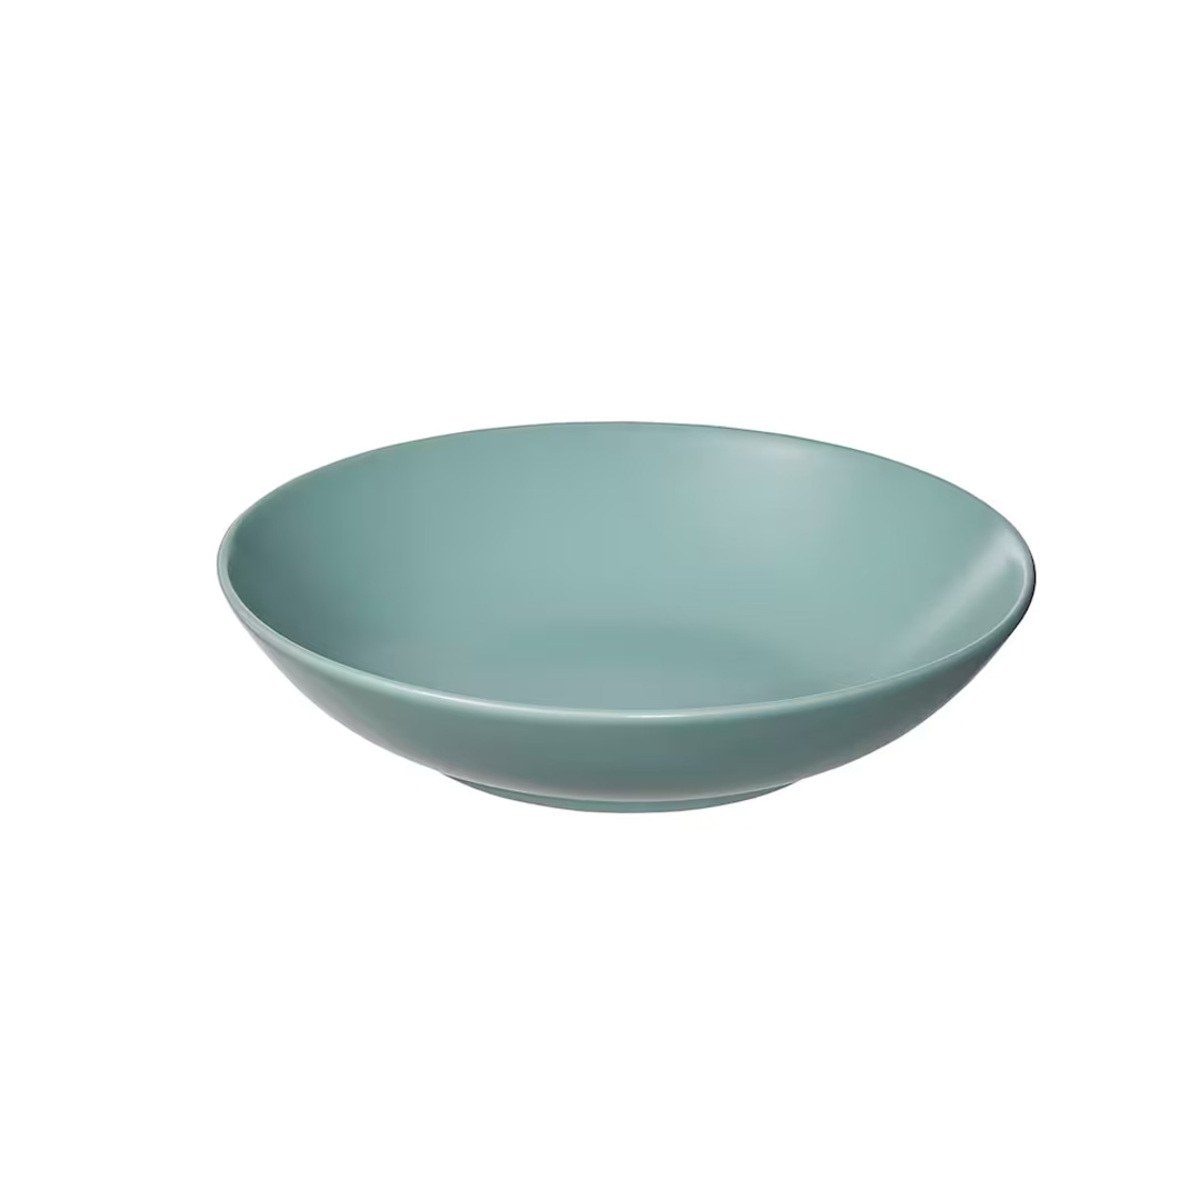 Little Homes Turquoise Stoneware Deep Plate 8.5"